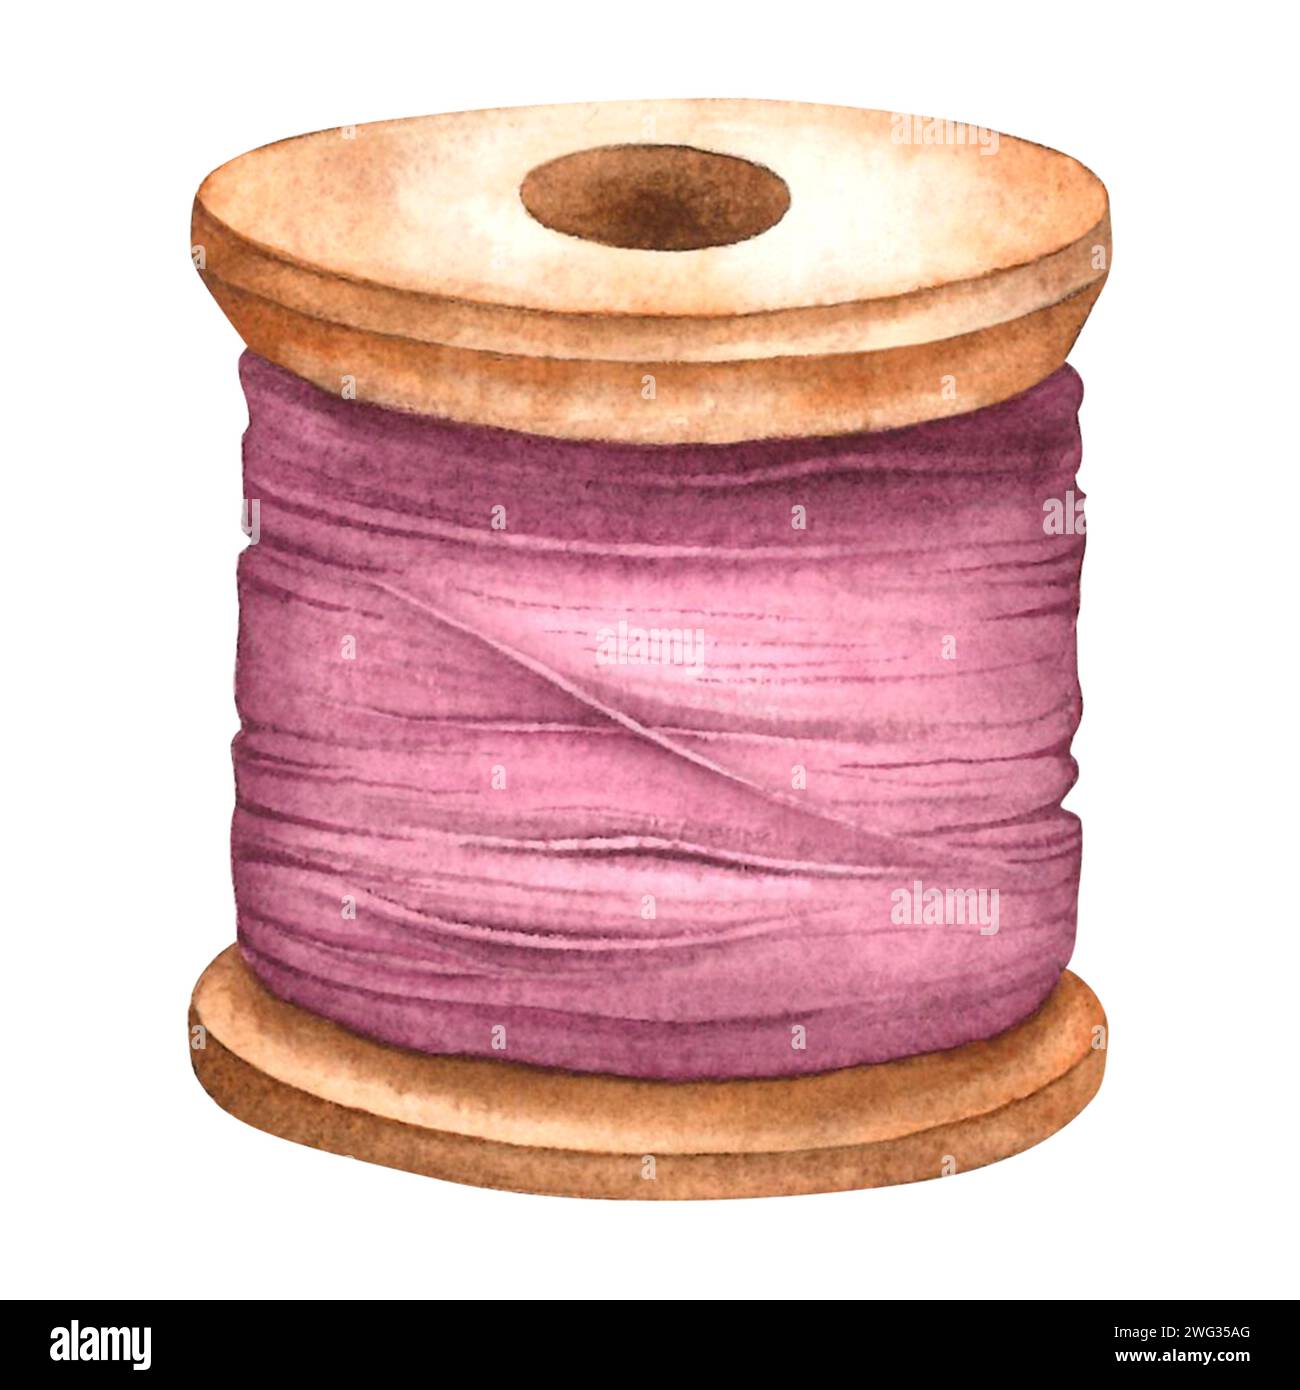 Dusty pink thread concept. Wooden spool of thread for clothing production. Hand drawn watercolor illustration of a reel on an isolated background. Stock Photo